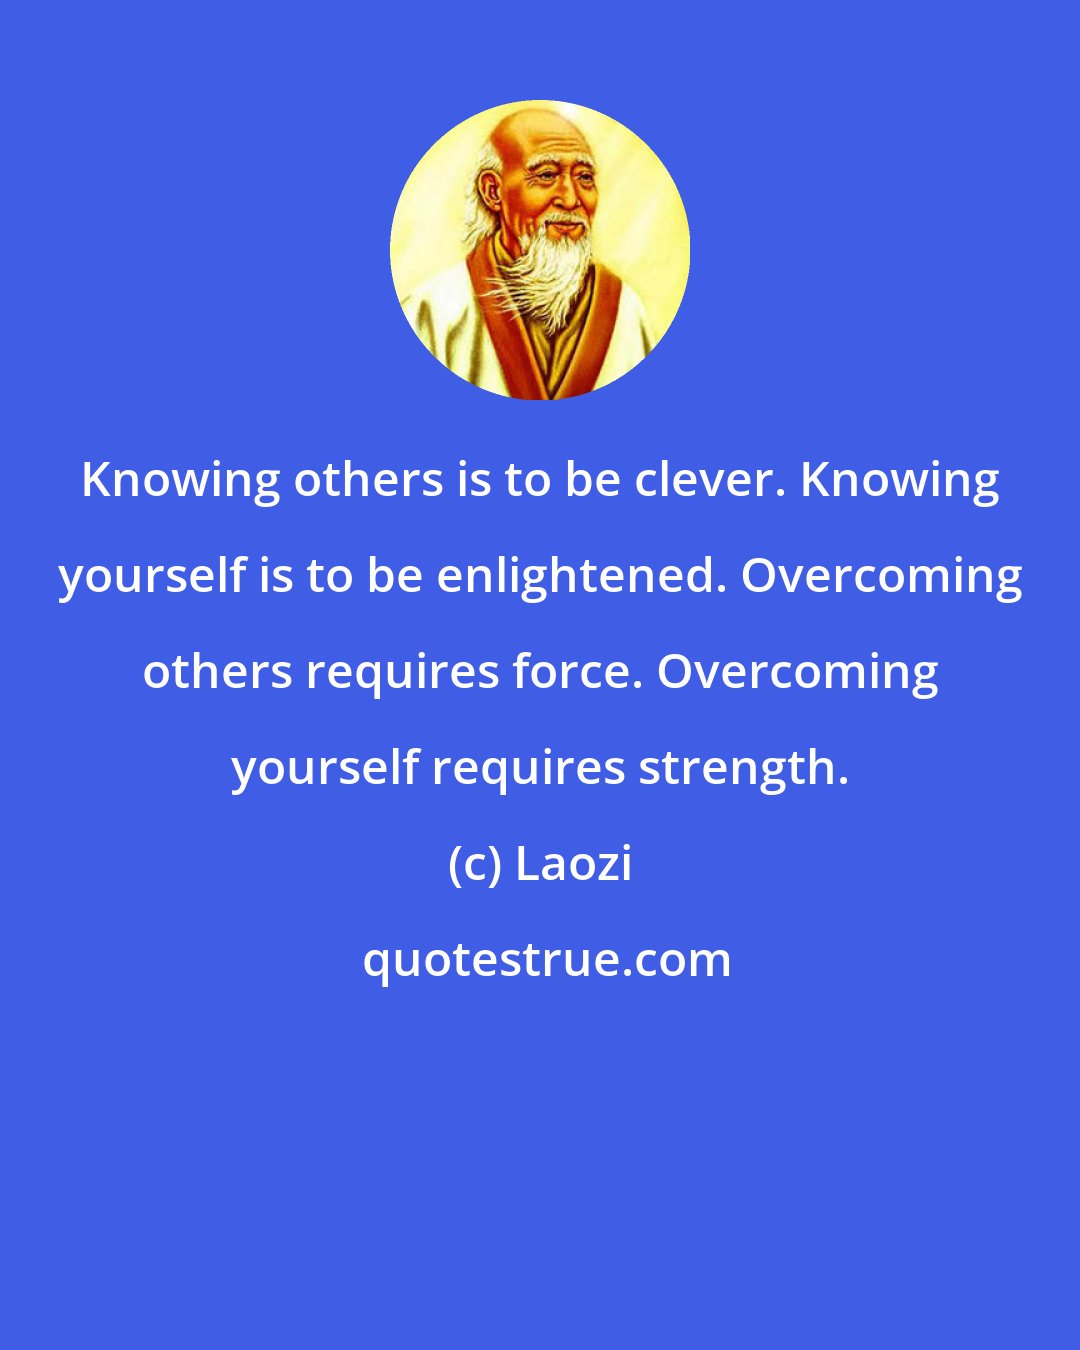 Laozi: Knowing others is to be clever. Knowing yourself is to be enlightened. Overcoming others requires force. Overcoming yourself requires strength.